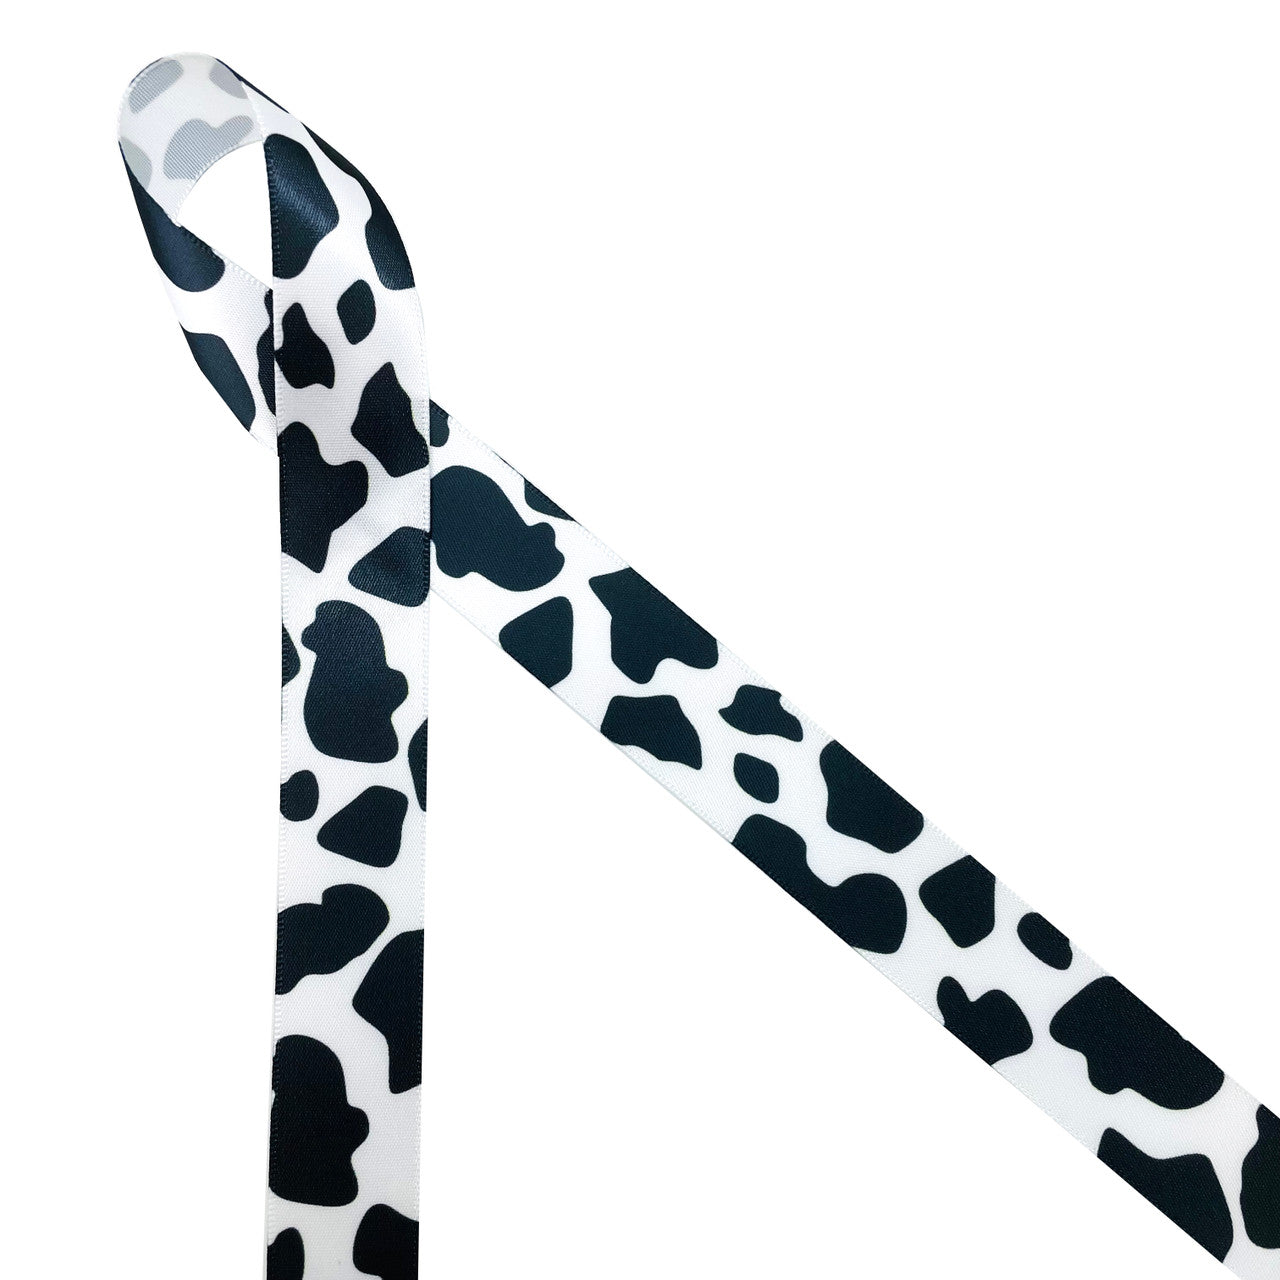 Cow print ribbon is a fun design for country themed projects, Toy Story parties and fun hair bows. Our cow pattern ribbon is printed on7/8" white single face satin and is ideal for wreaths, gift wrap, party decor and barnyard themed crafts. Be sure to have this ribbon on hand for cosplay, costume design and tutu trim as well! All our ribbon  is designed and  printed in the USA